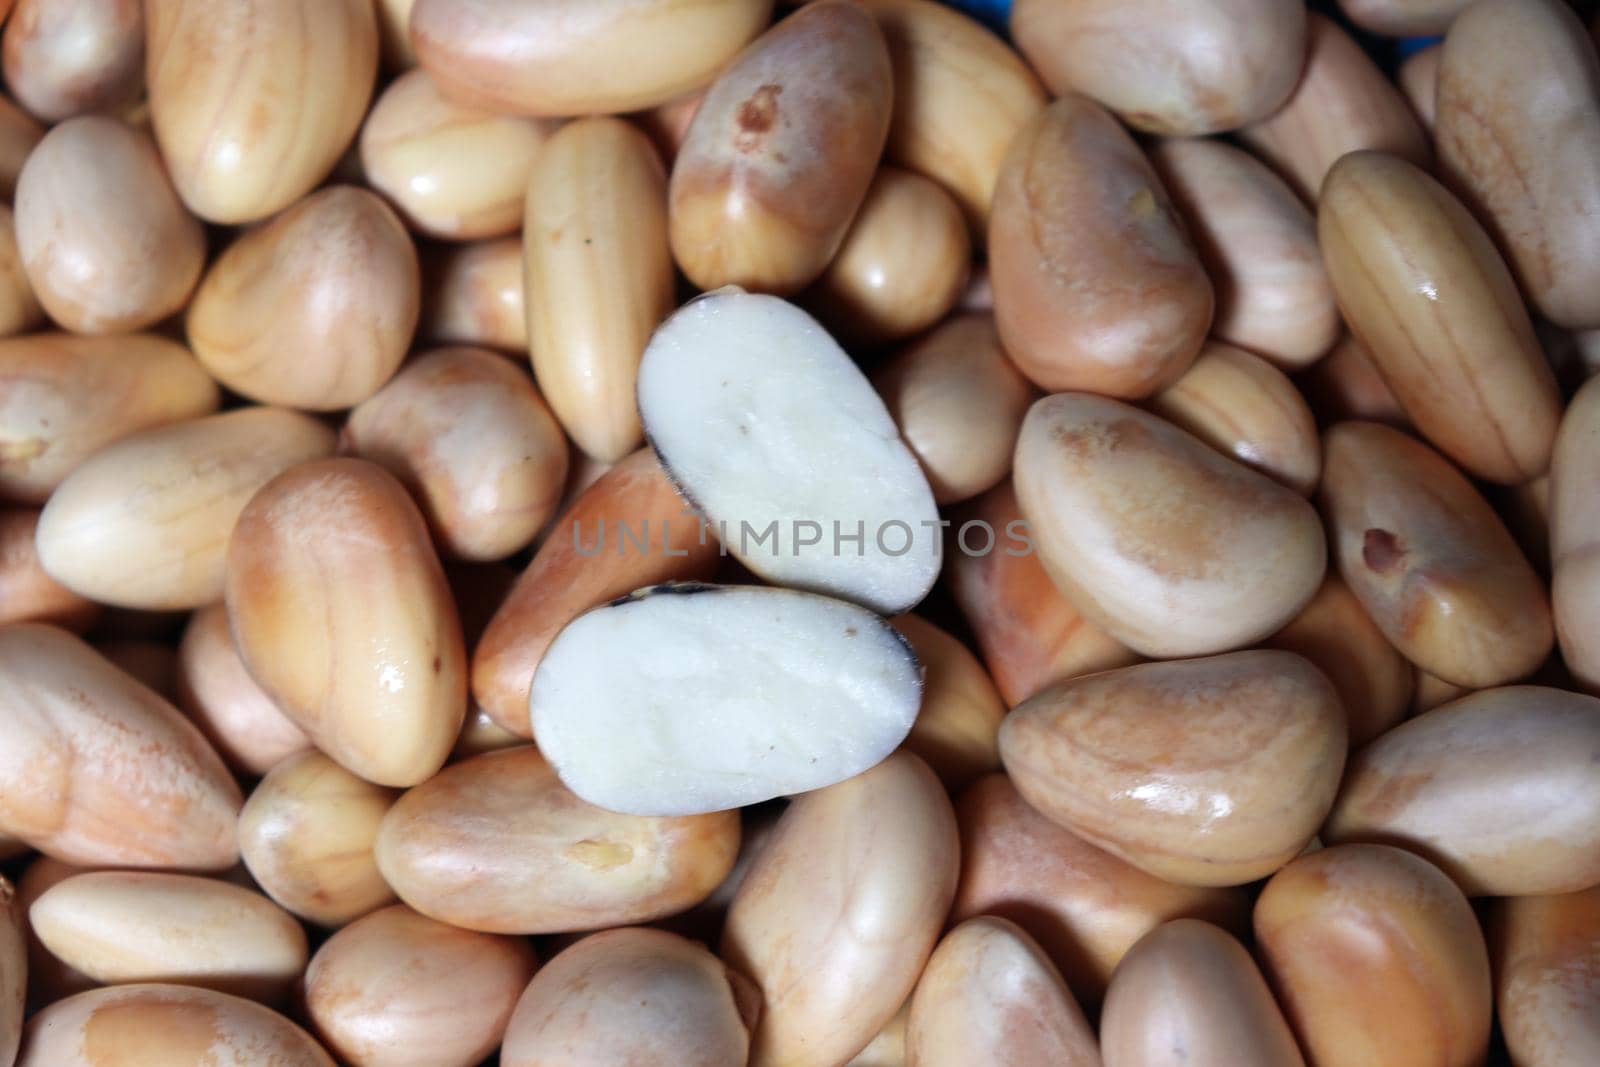 jackfruit seeds stock on shop for sell by jahidul2358